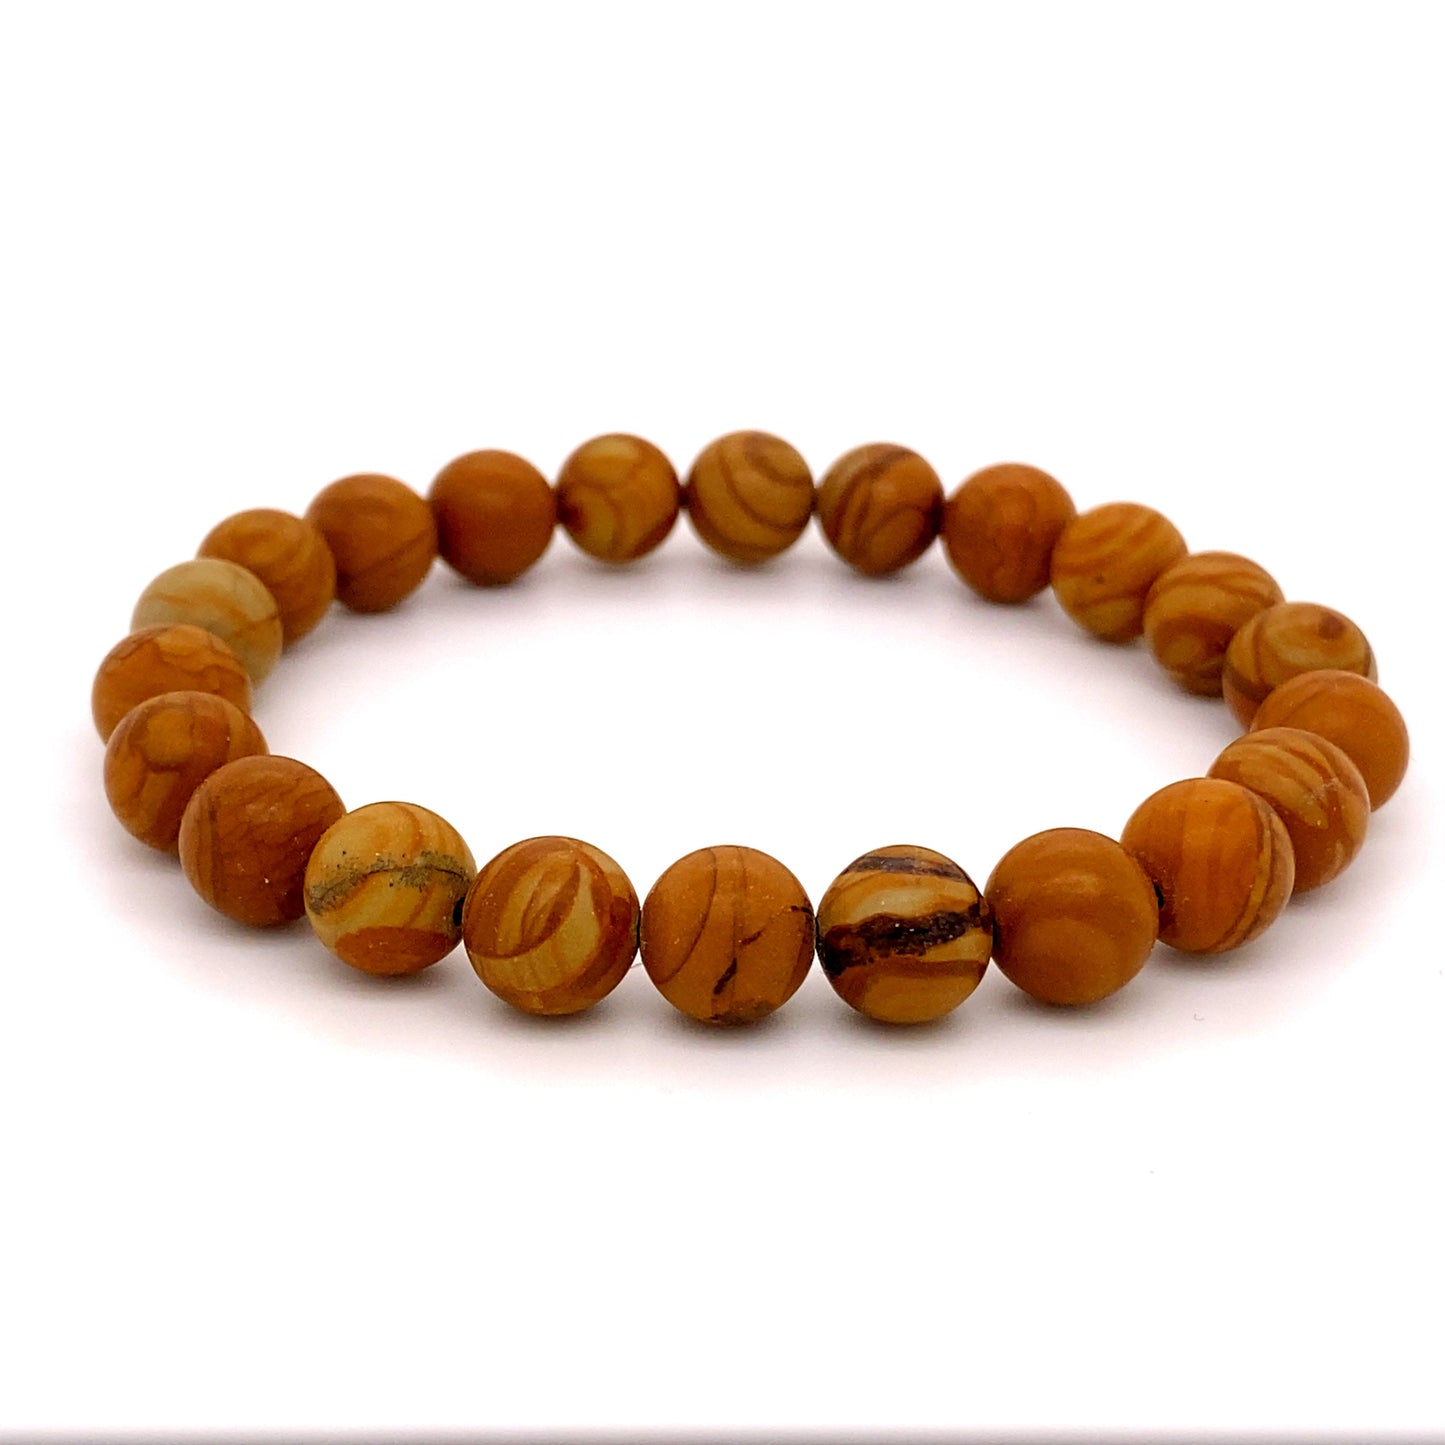 
                  
                    A 4mm beaded healing stone bracelet made of polished brown and tan stones with striped patterns, arranged in a circle on a white background.
                  
                